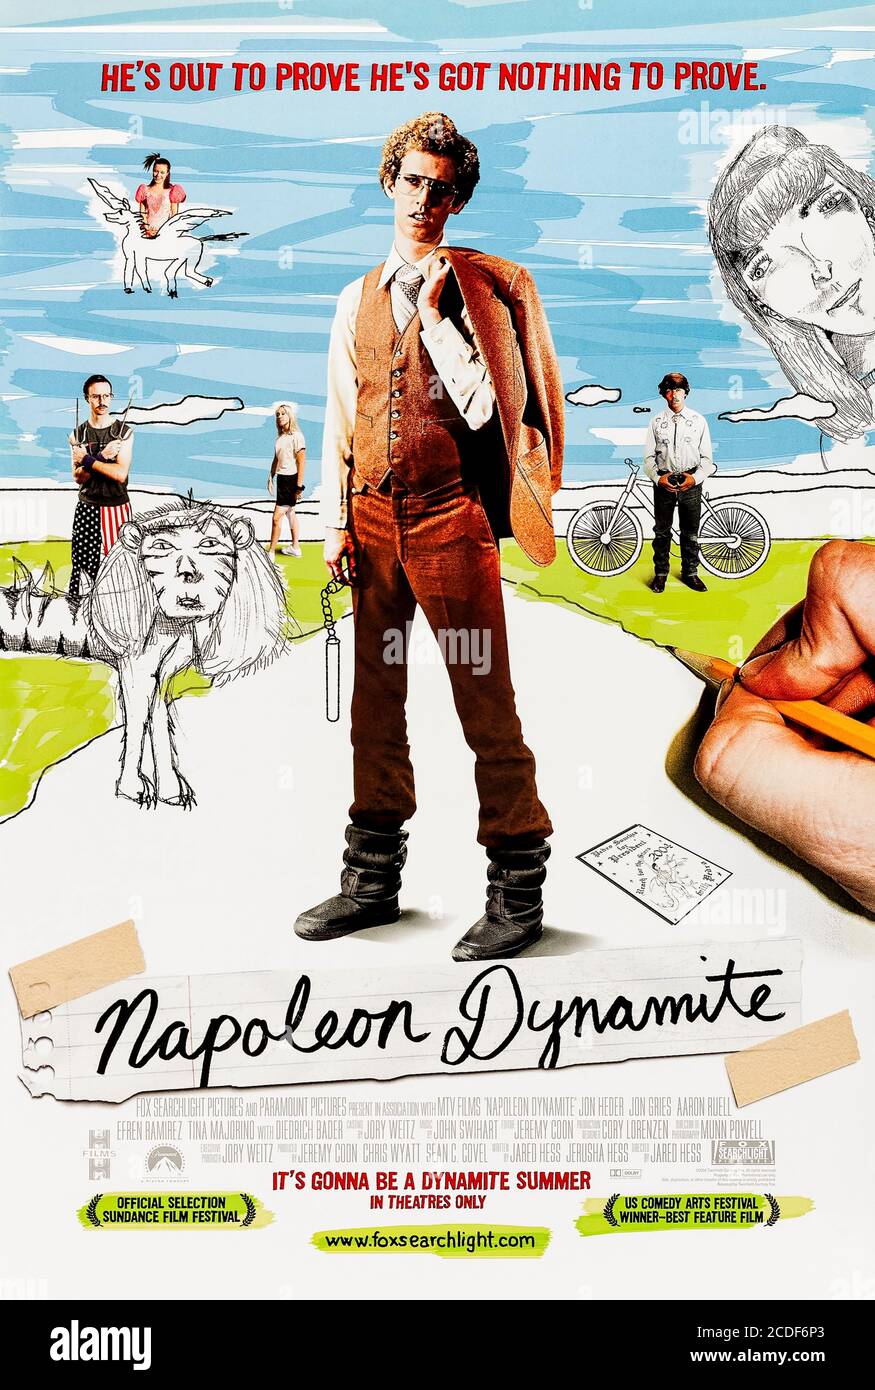 Napoleon Dynamite (2004) directed by Jared Hess and starring Jon Heder, Efren Ramirez, Jon Gries and Tina Majorino. Cult comedy about an awkward teenager who decides to run for class presidency. Stock Photo